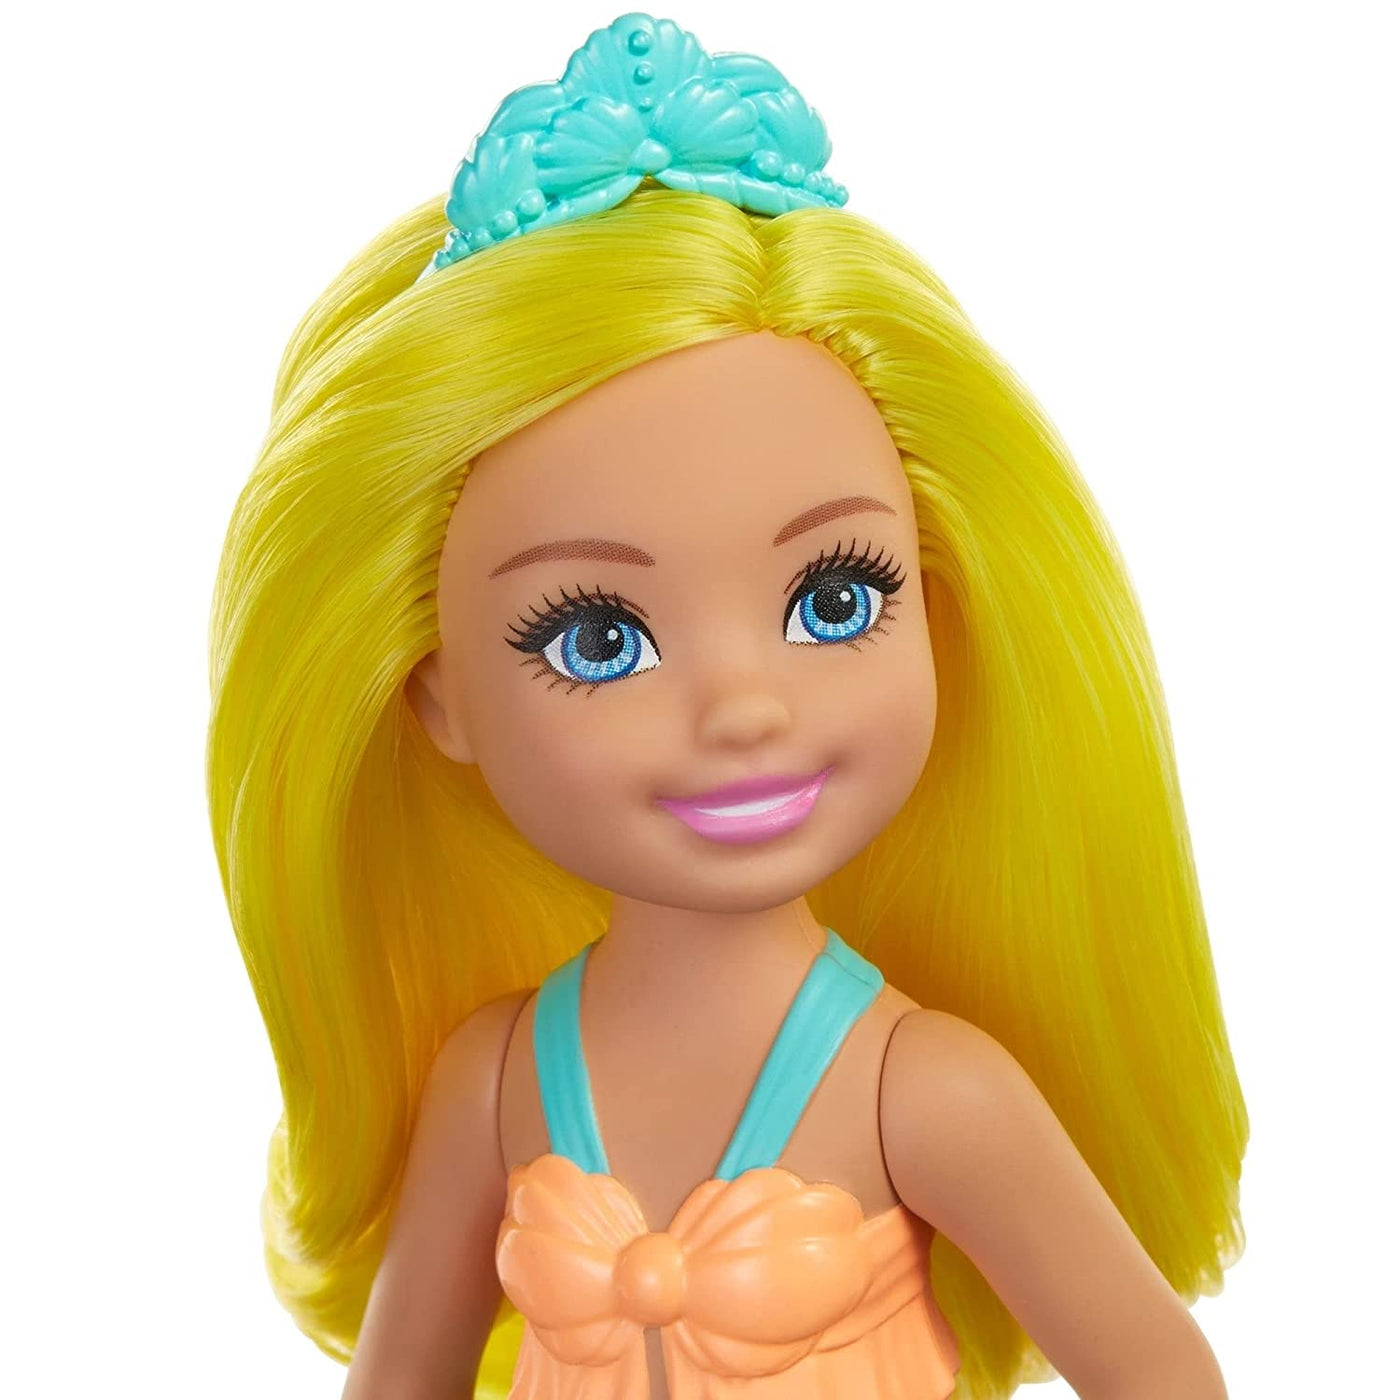 Dreamtopia Chelsea Mermaid Doll: 6.5-Inch - Yellow Hair And Tail | Barbie